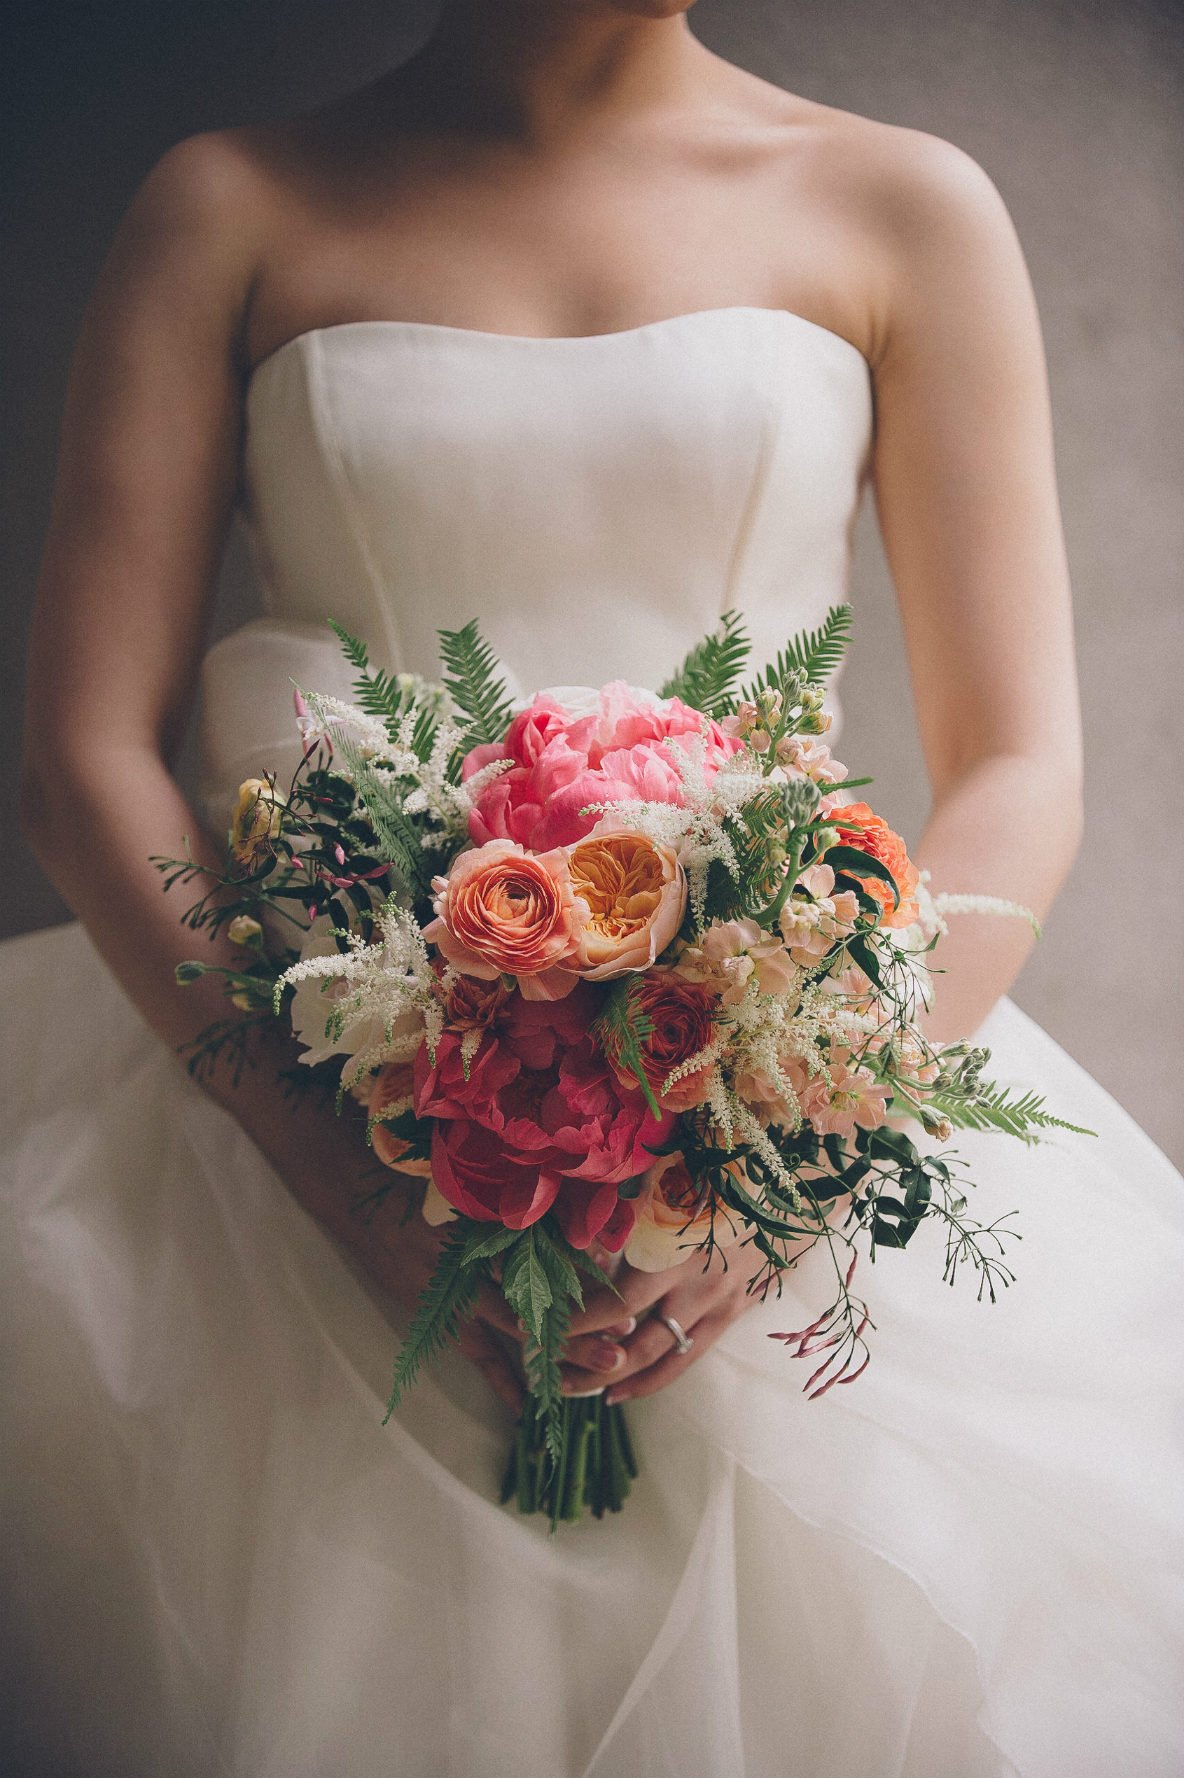 23.-Rookery-Wedding.-This-is-Feeling-Photography.-Sweetchic-Events.-Vale-of-Enna.-Organic-Bouquet.-Peonies.-Ranunculus.-Peach.-Coral.-Greenery.jpg